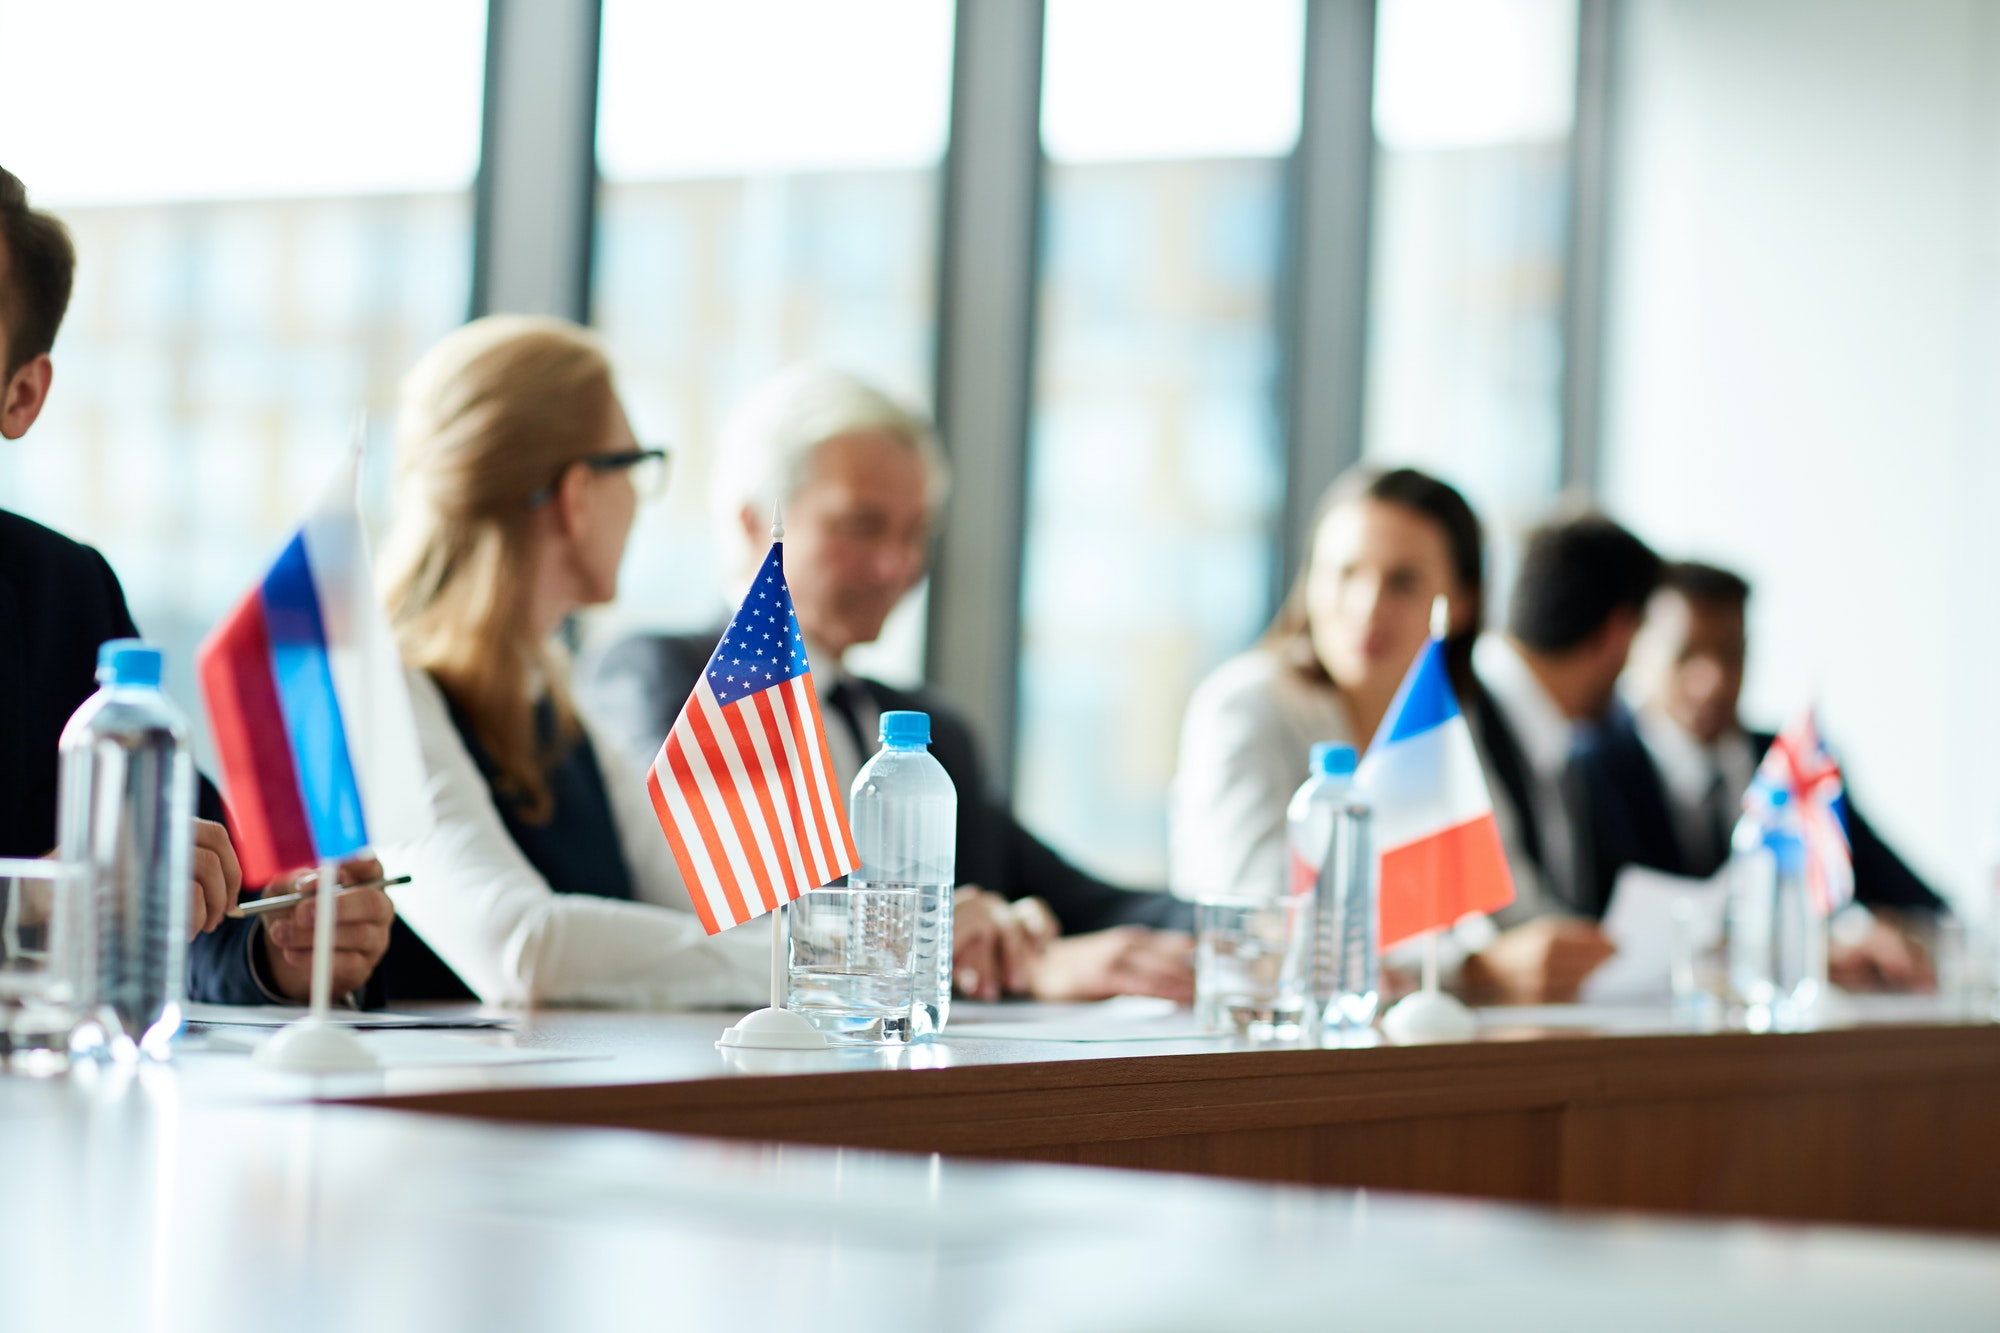 Small national flags on conference table